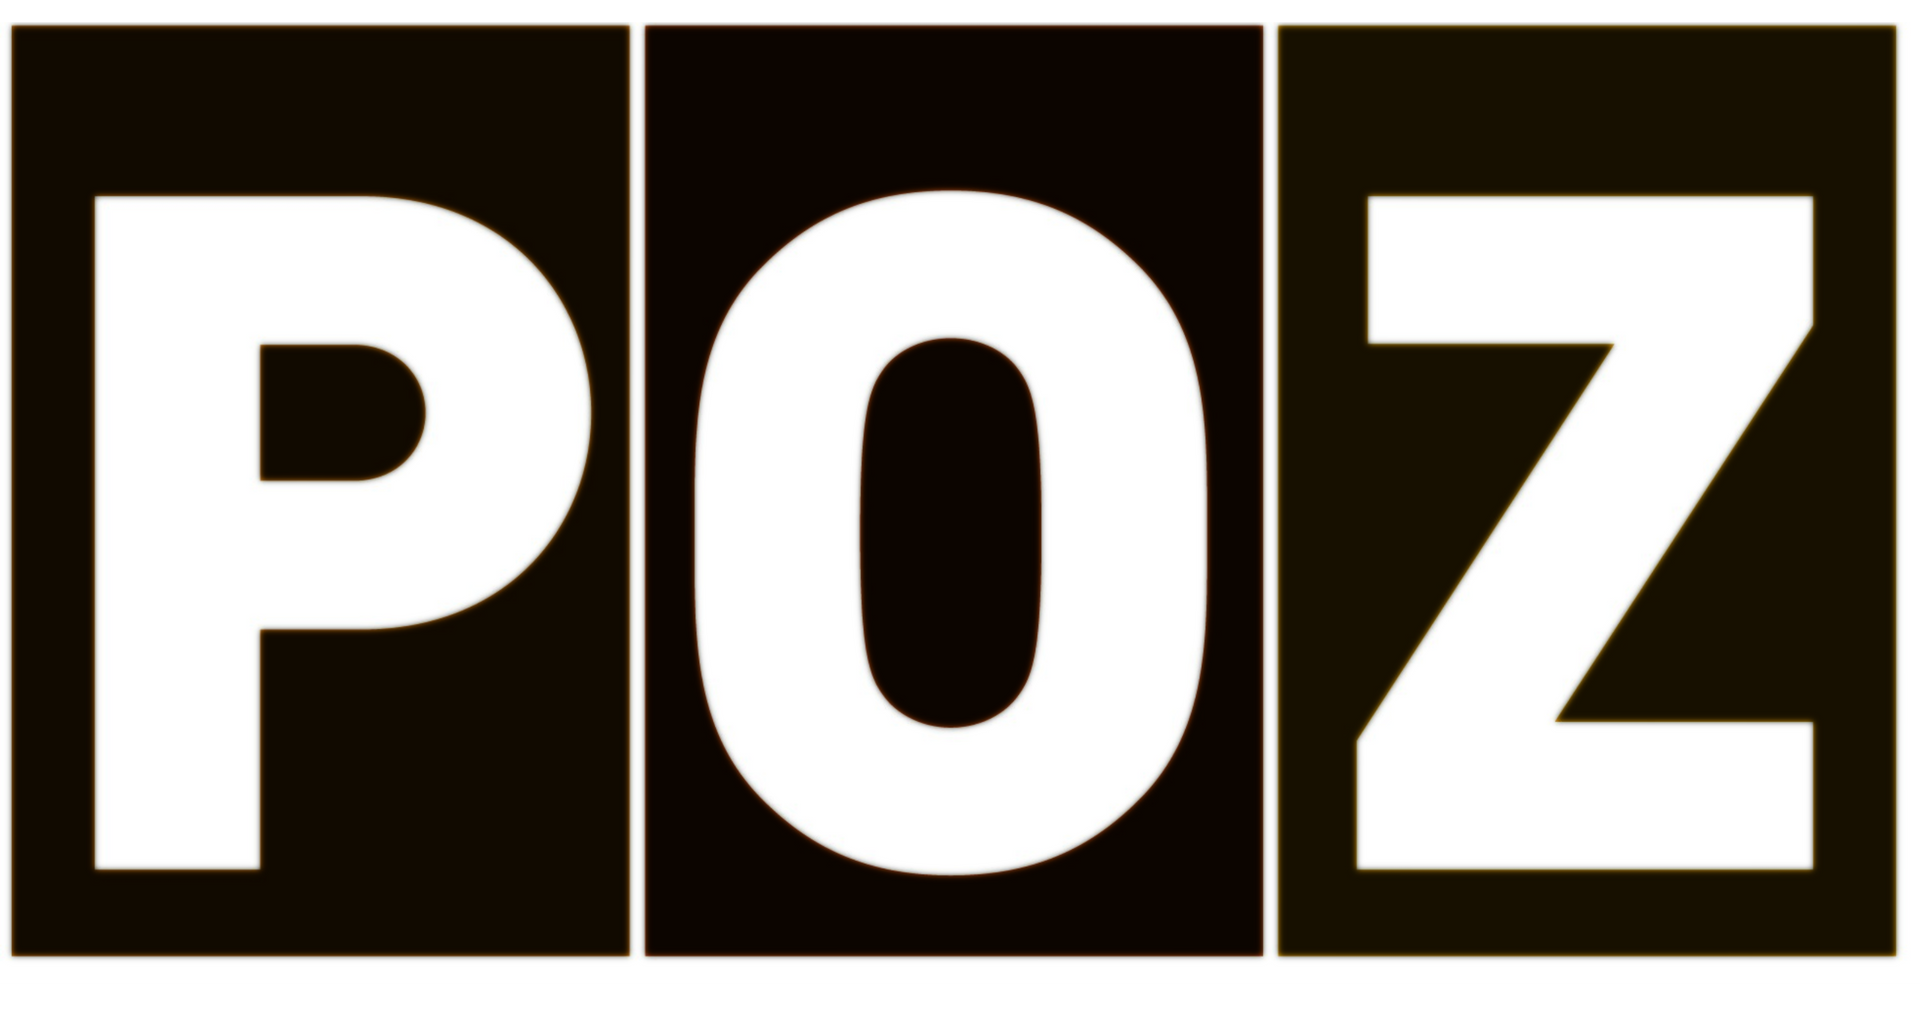 The word poz is written in white on a black background